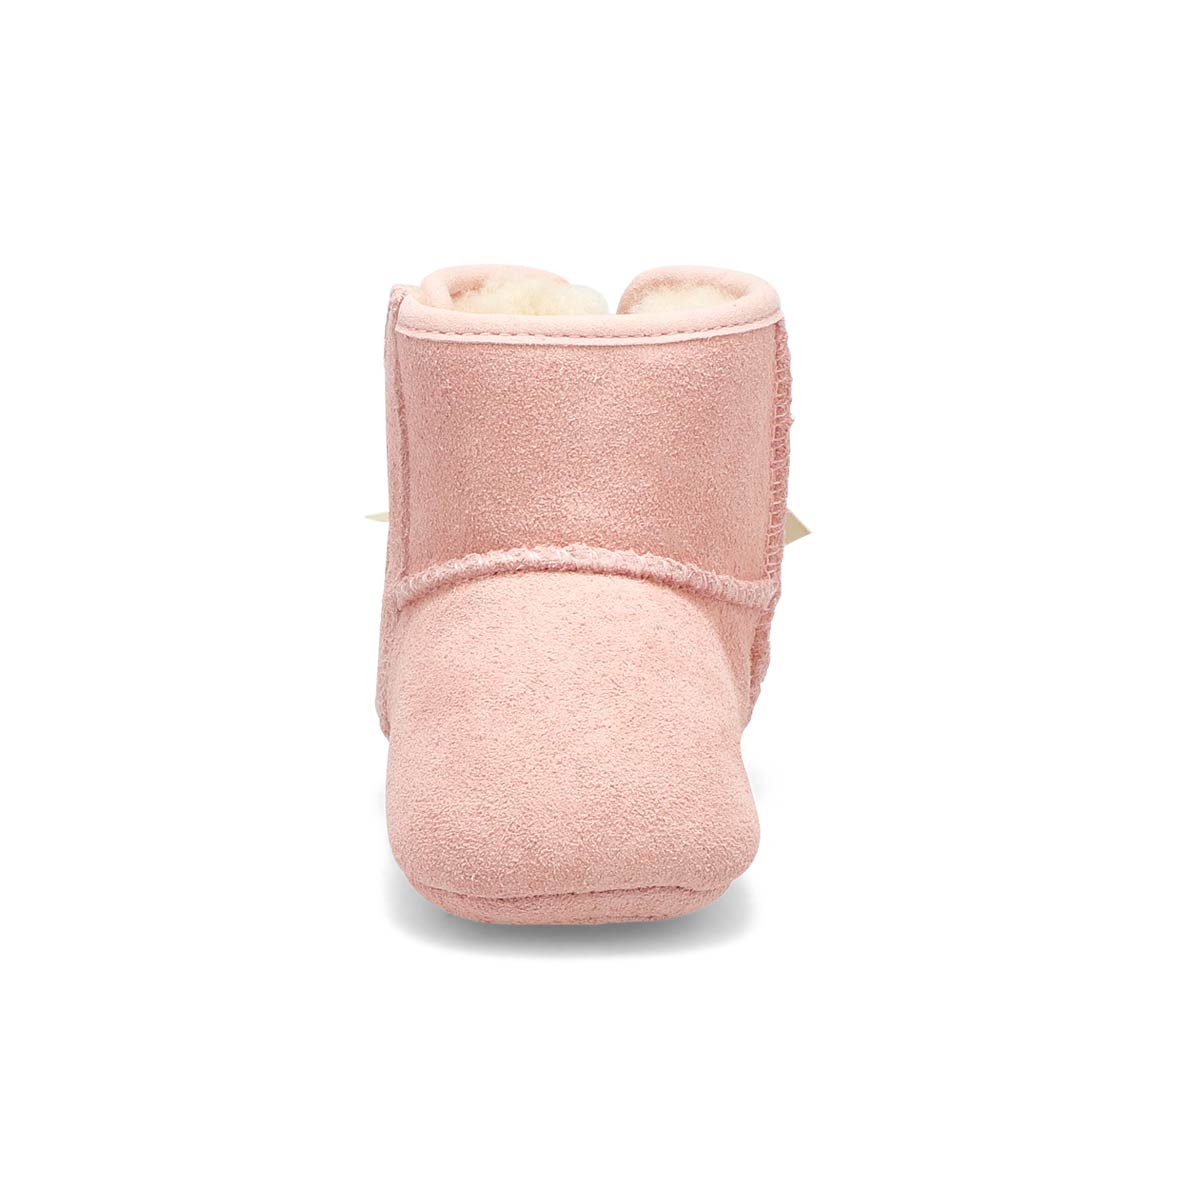 Infants' Jesse Bow II Fashion Boot - Baby Pink